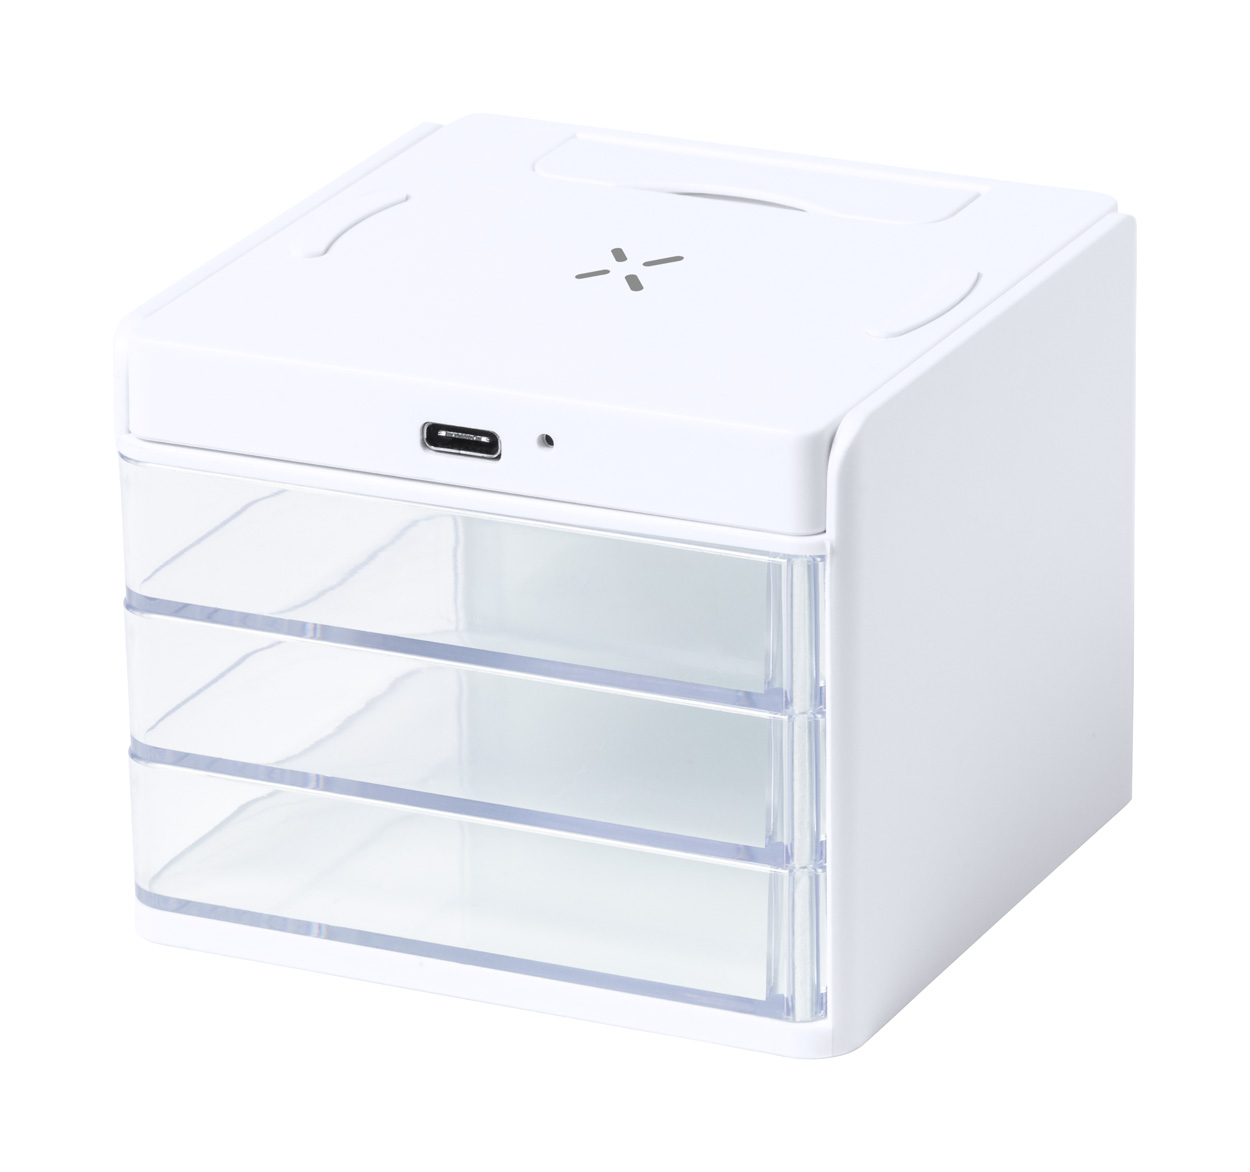 Macky organizer with wireless charger - white